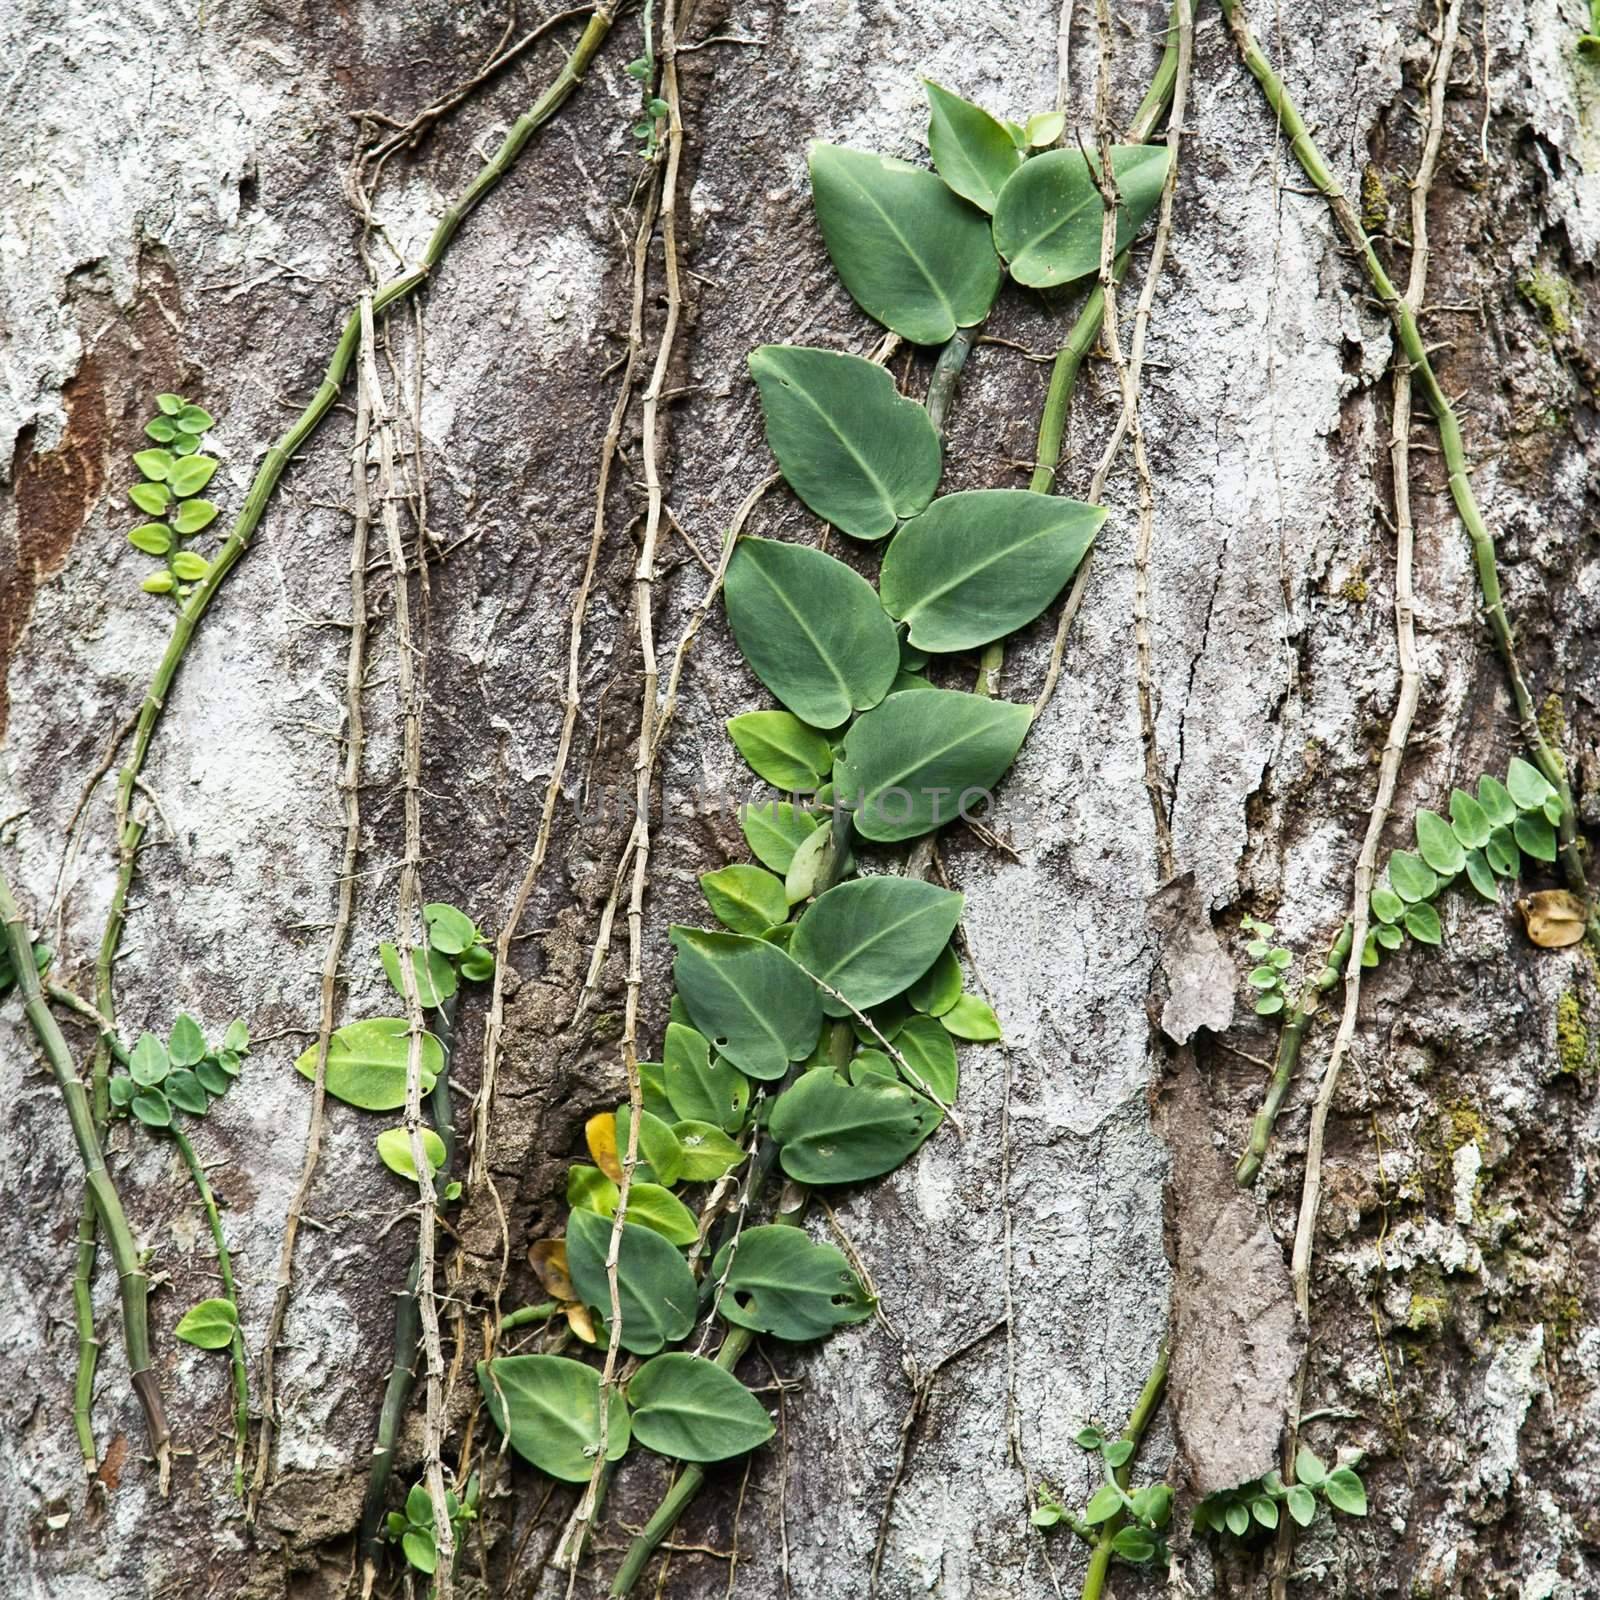 Plants and vines attached to tree bark in Daintree Rainforest, Australia.